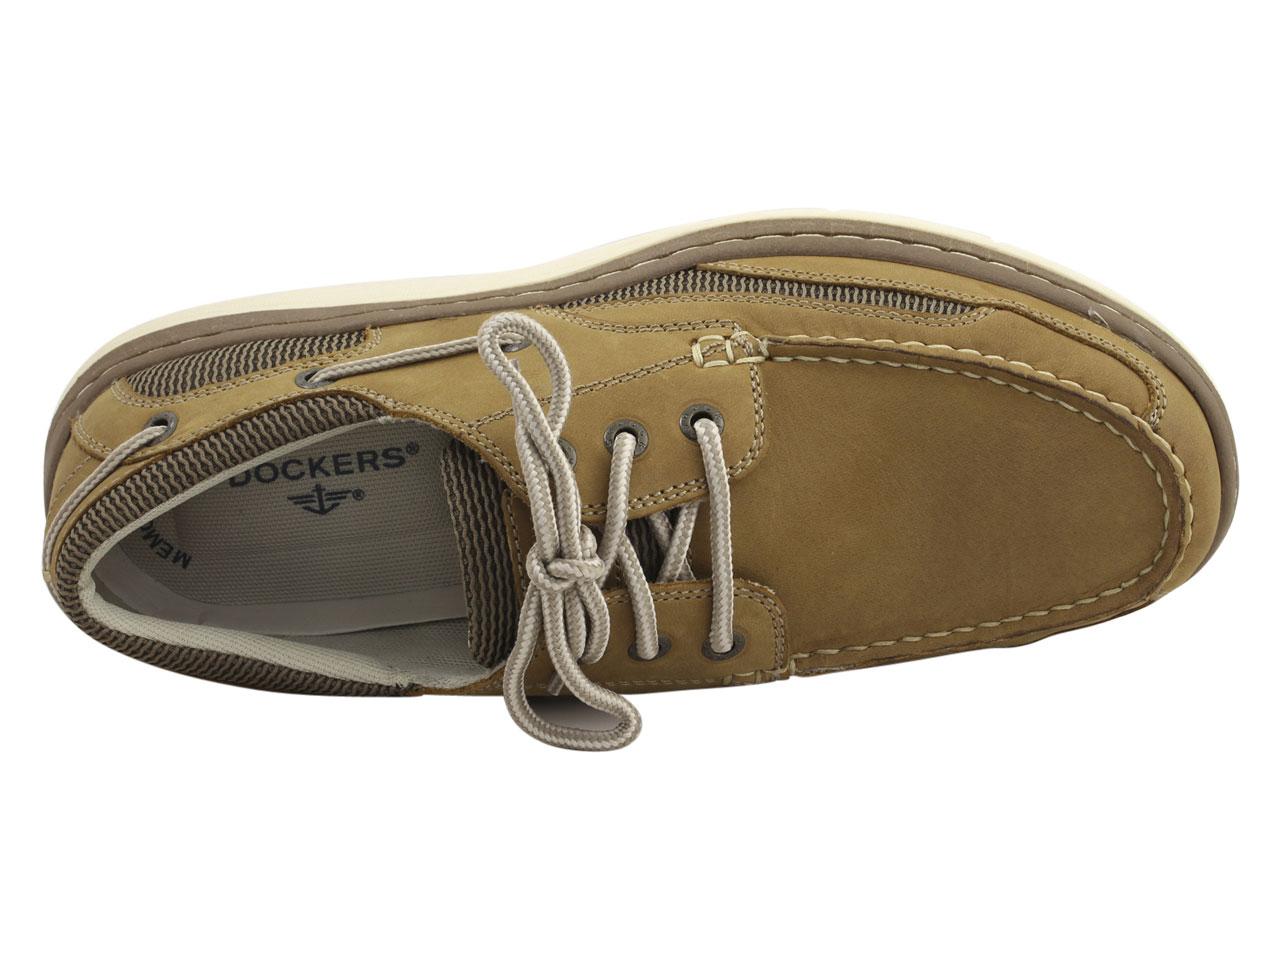 Lakeport Memory Foam Loafers Boat Shoes